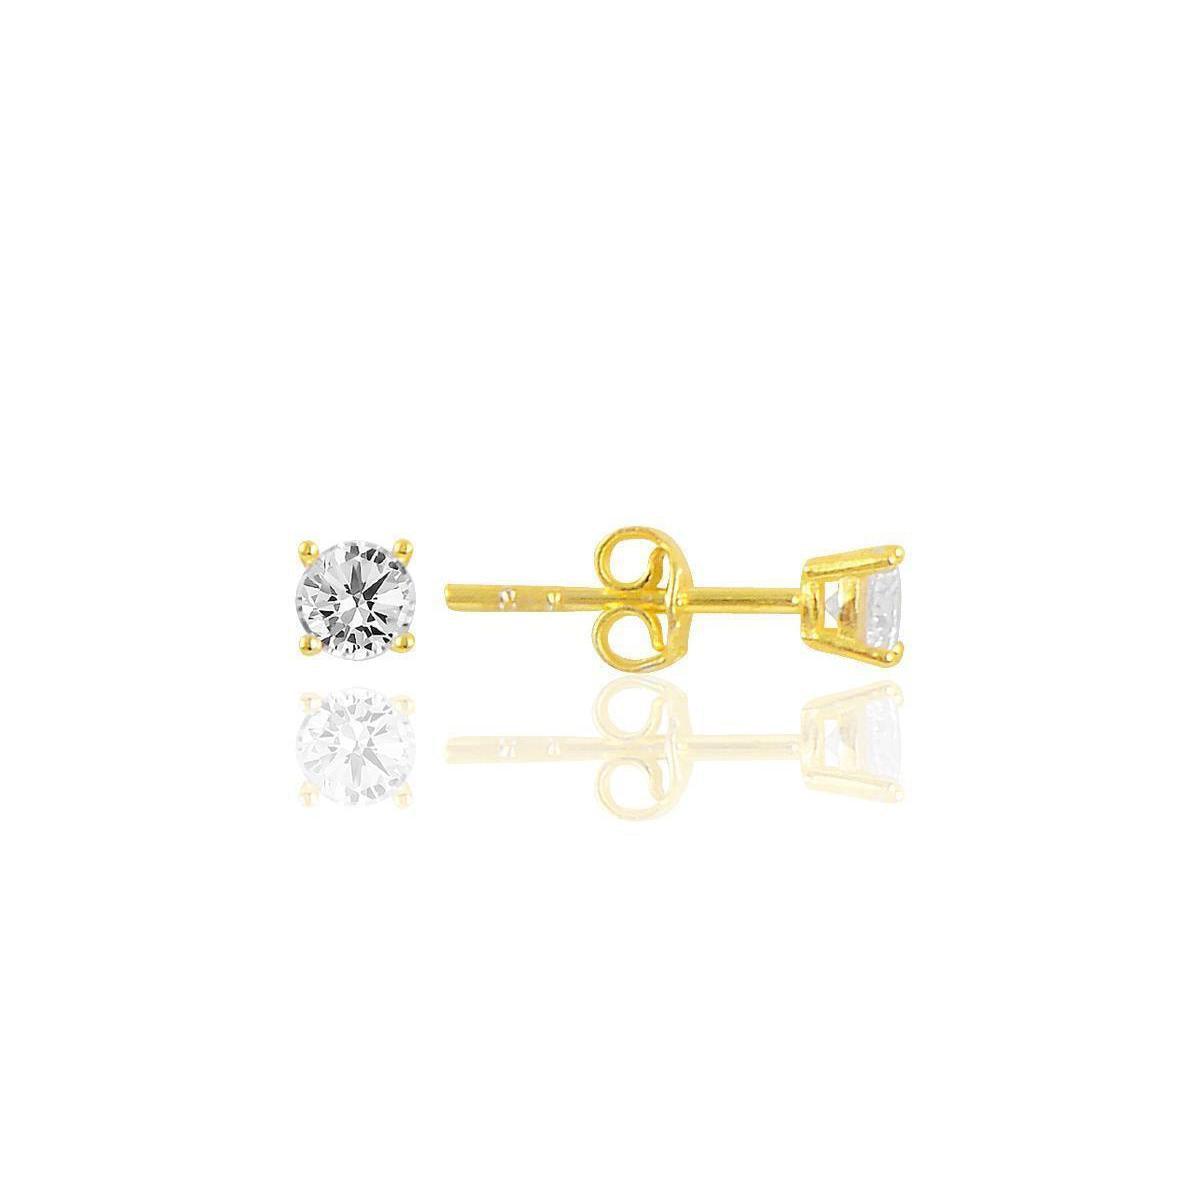 Yellow Gold Diamond Solitaire Earrings, Gold Diamond Solitaire Earring - Trending Silver Gifts